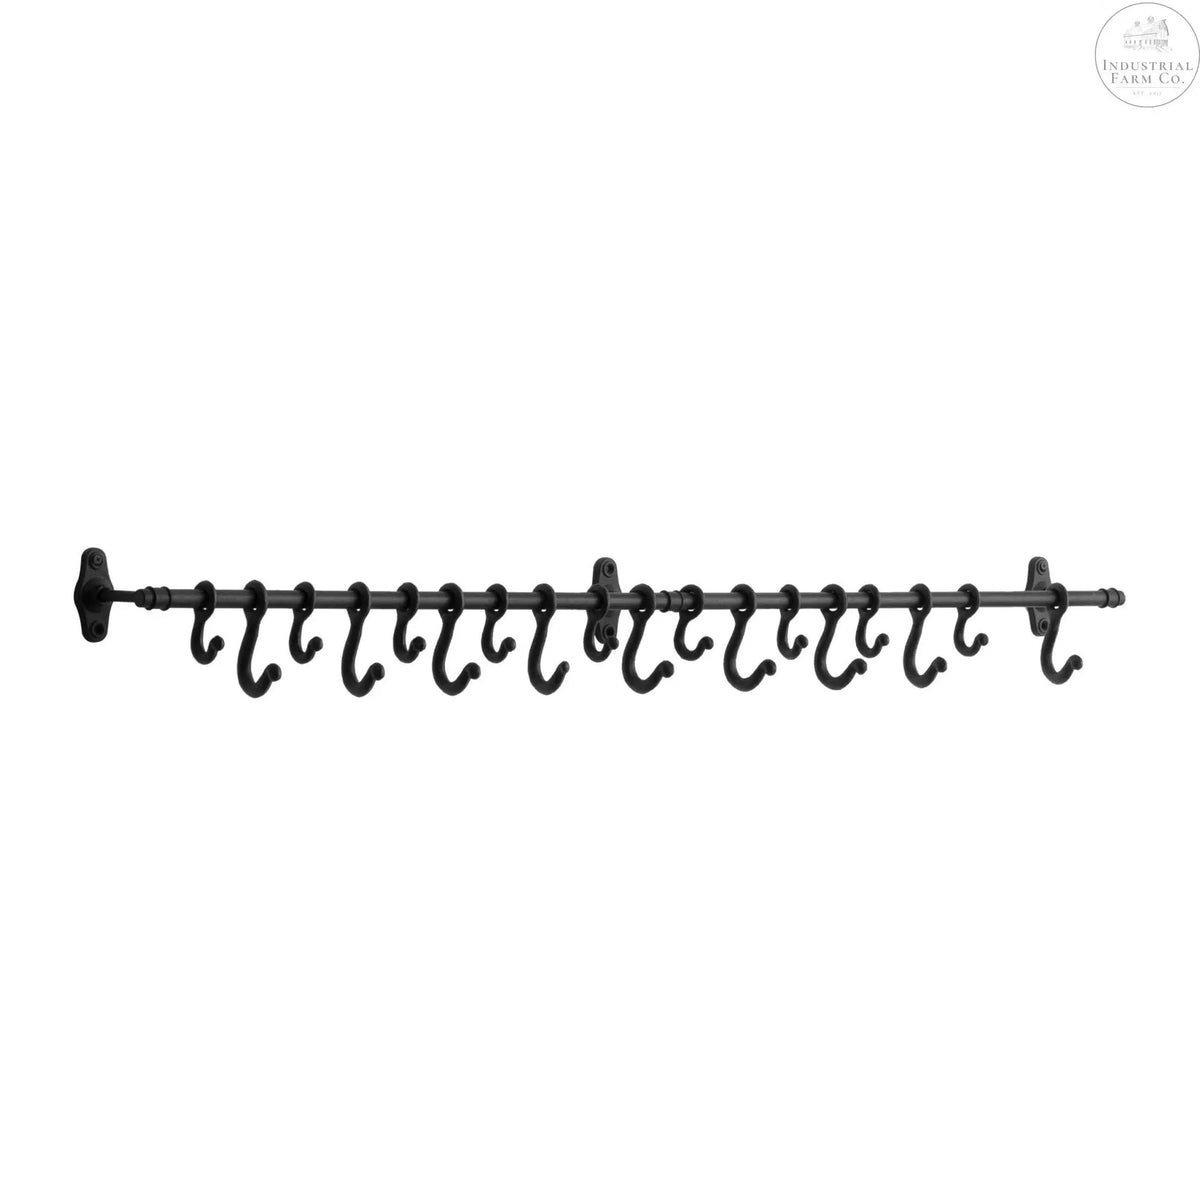 Forged Metal Wall Rod with Hooks     | Industrial Farm Co